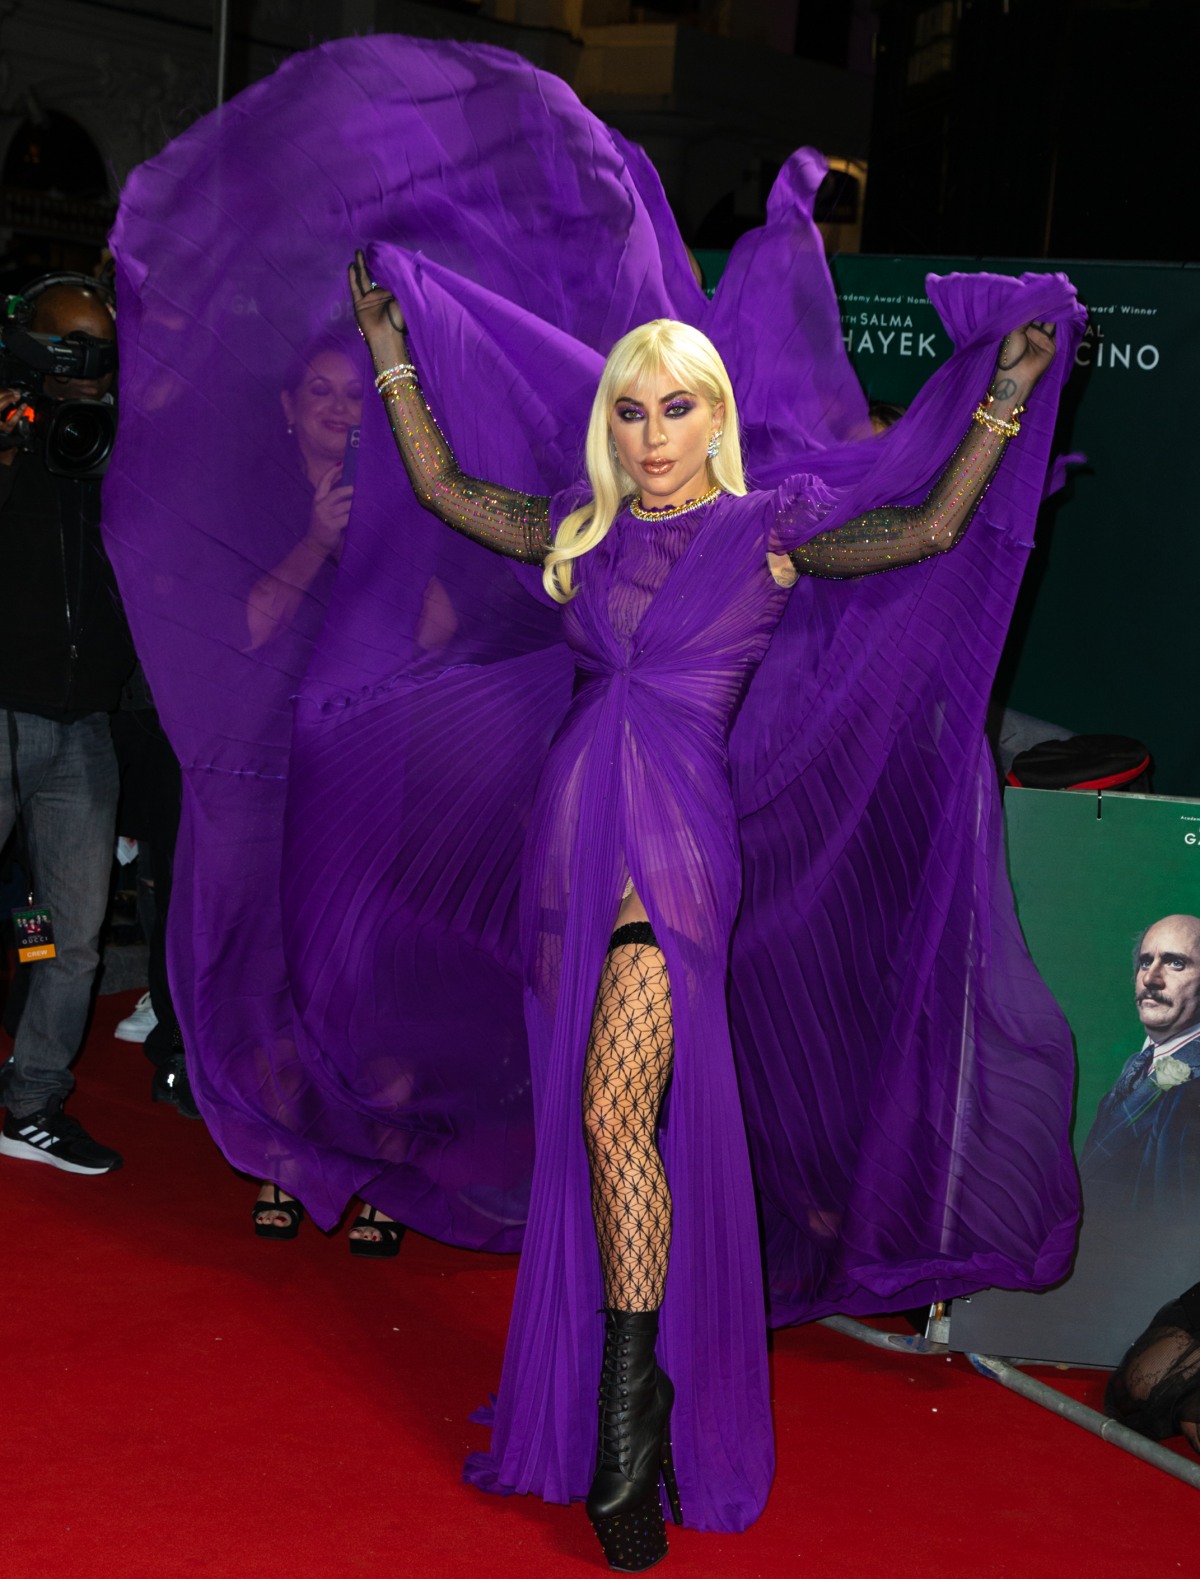 The UK Premiere of 'House of Gucci' held at the Odeon Luxe, Leicester Square